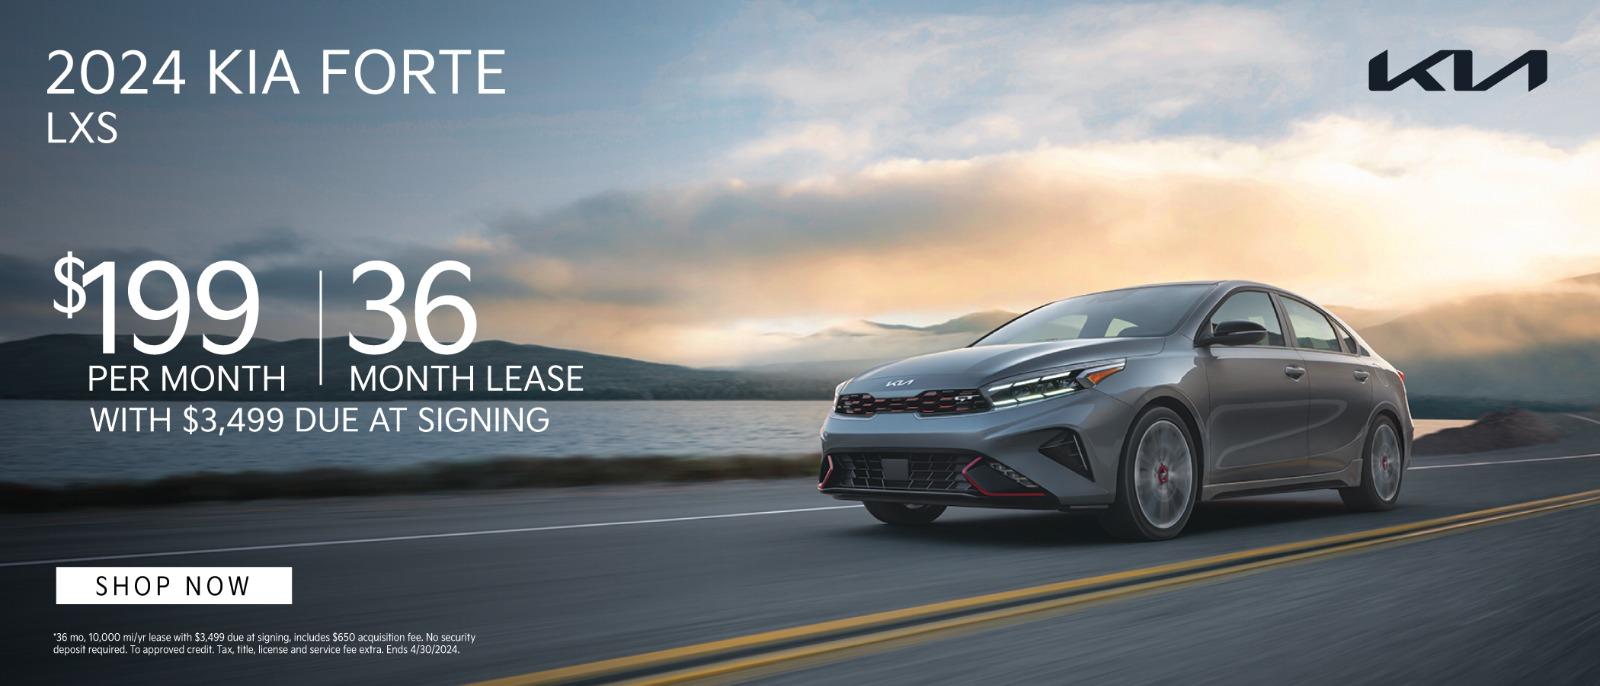 2024 Kia Forte LXS lease for $199 per month for 36 months